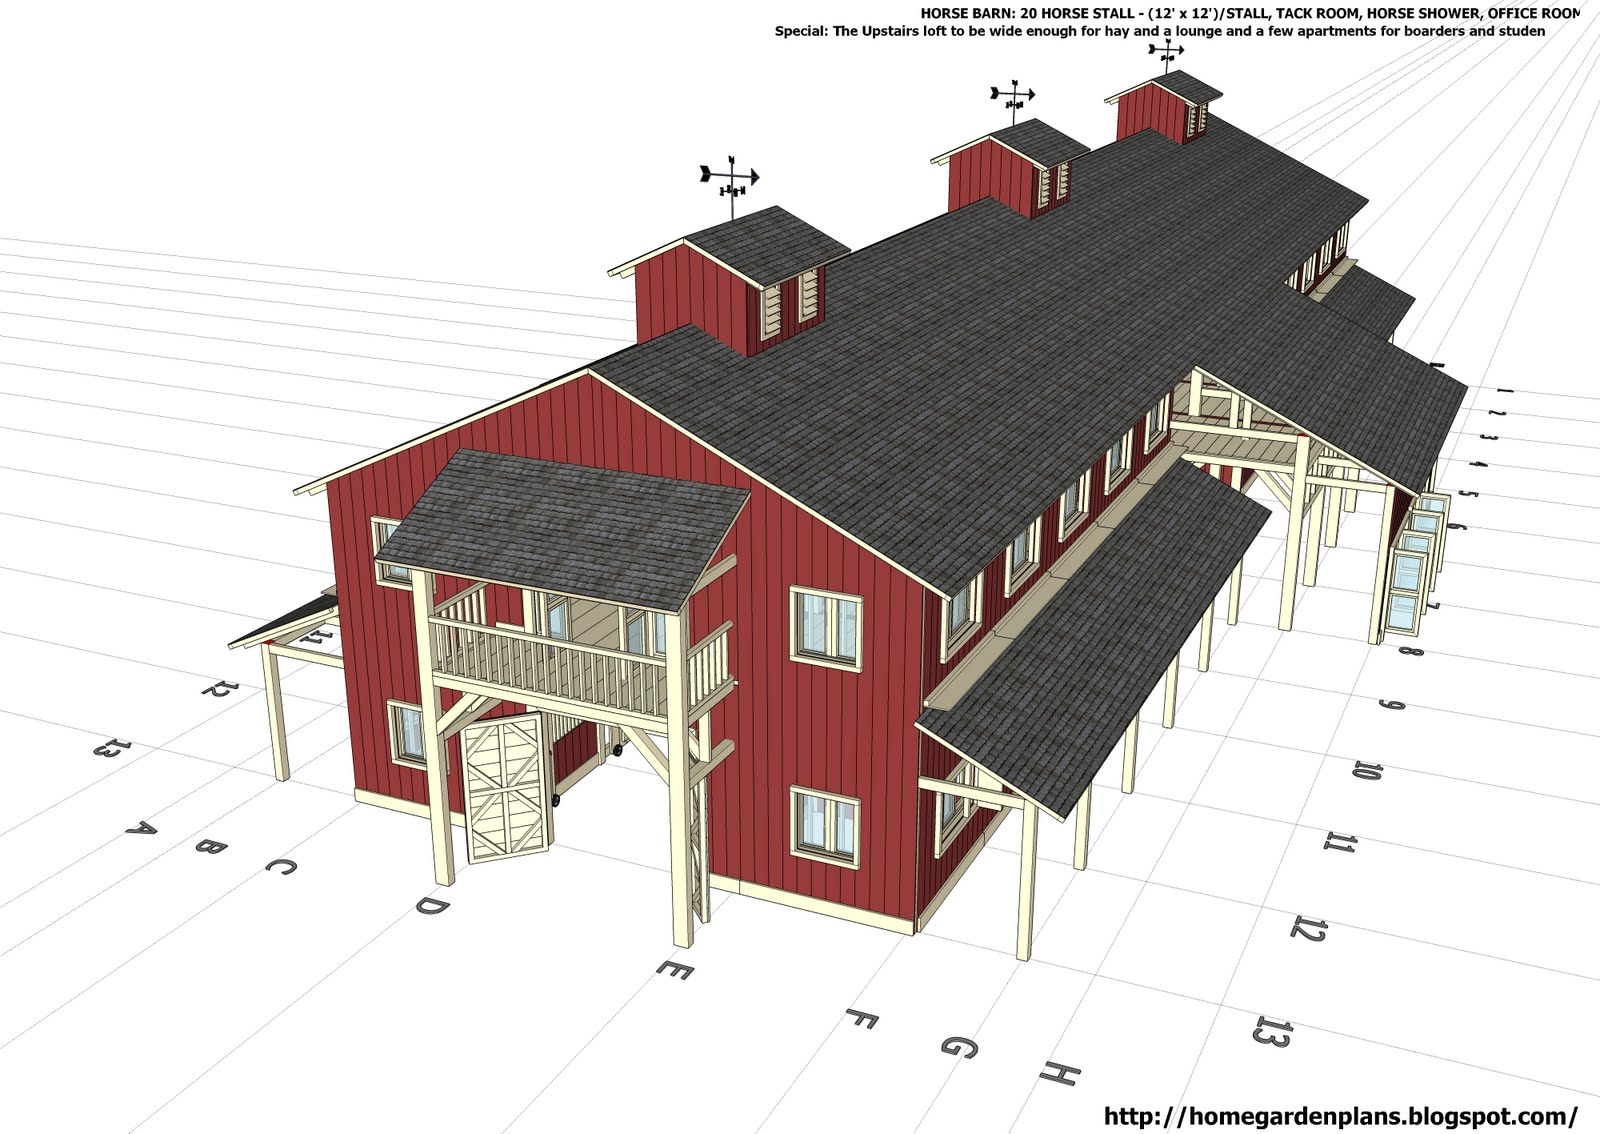 Free Horse Barn Plans How to Build DIY by 